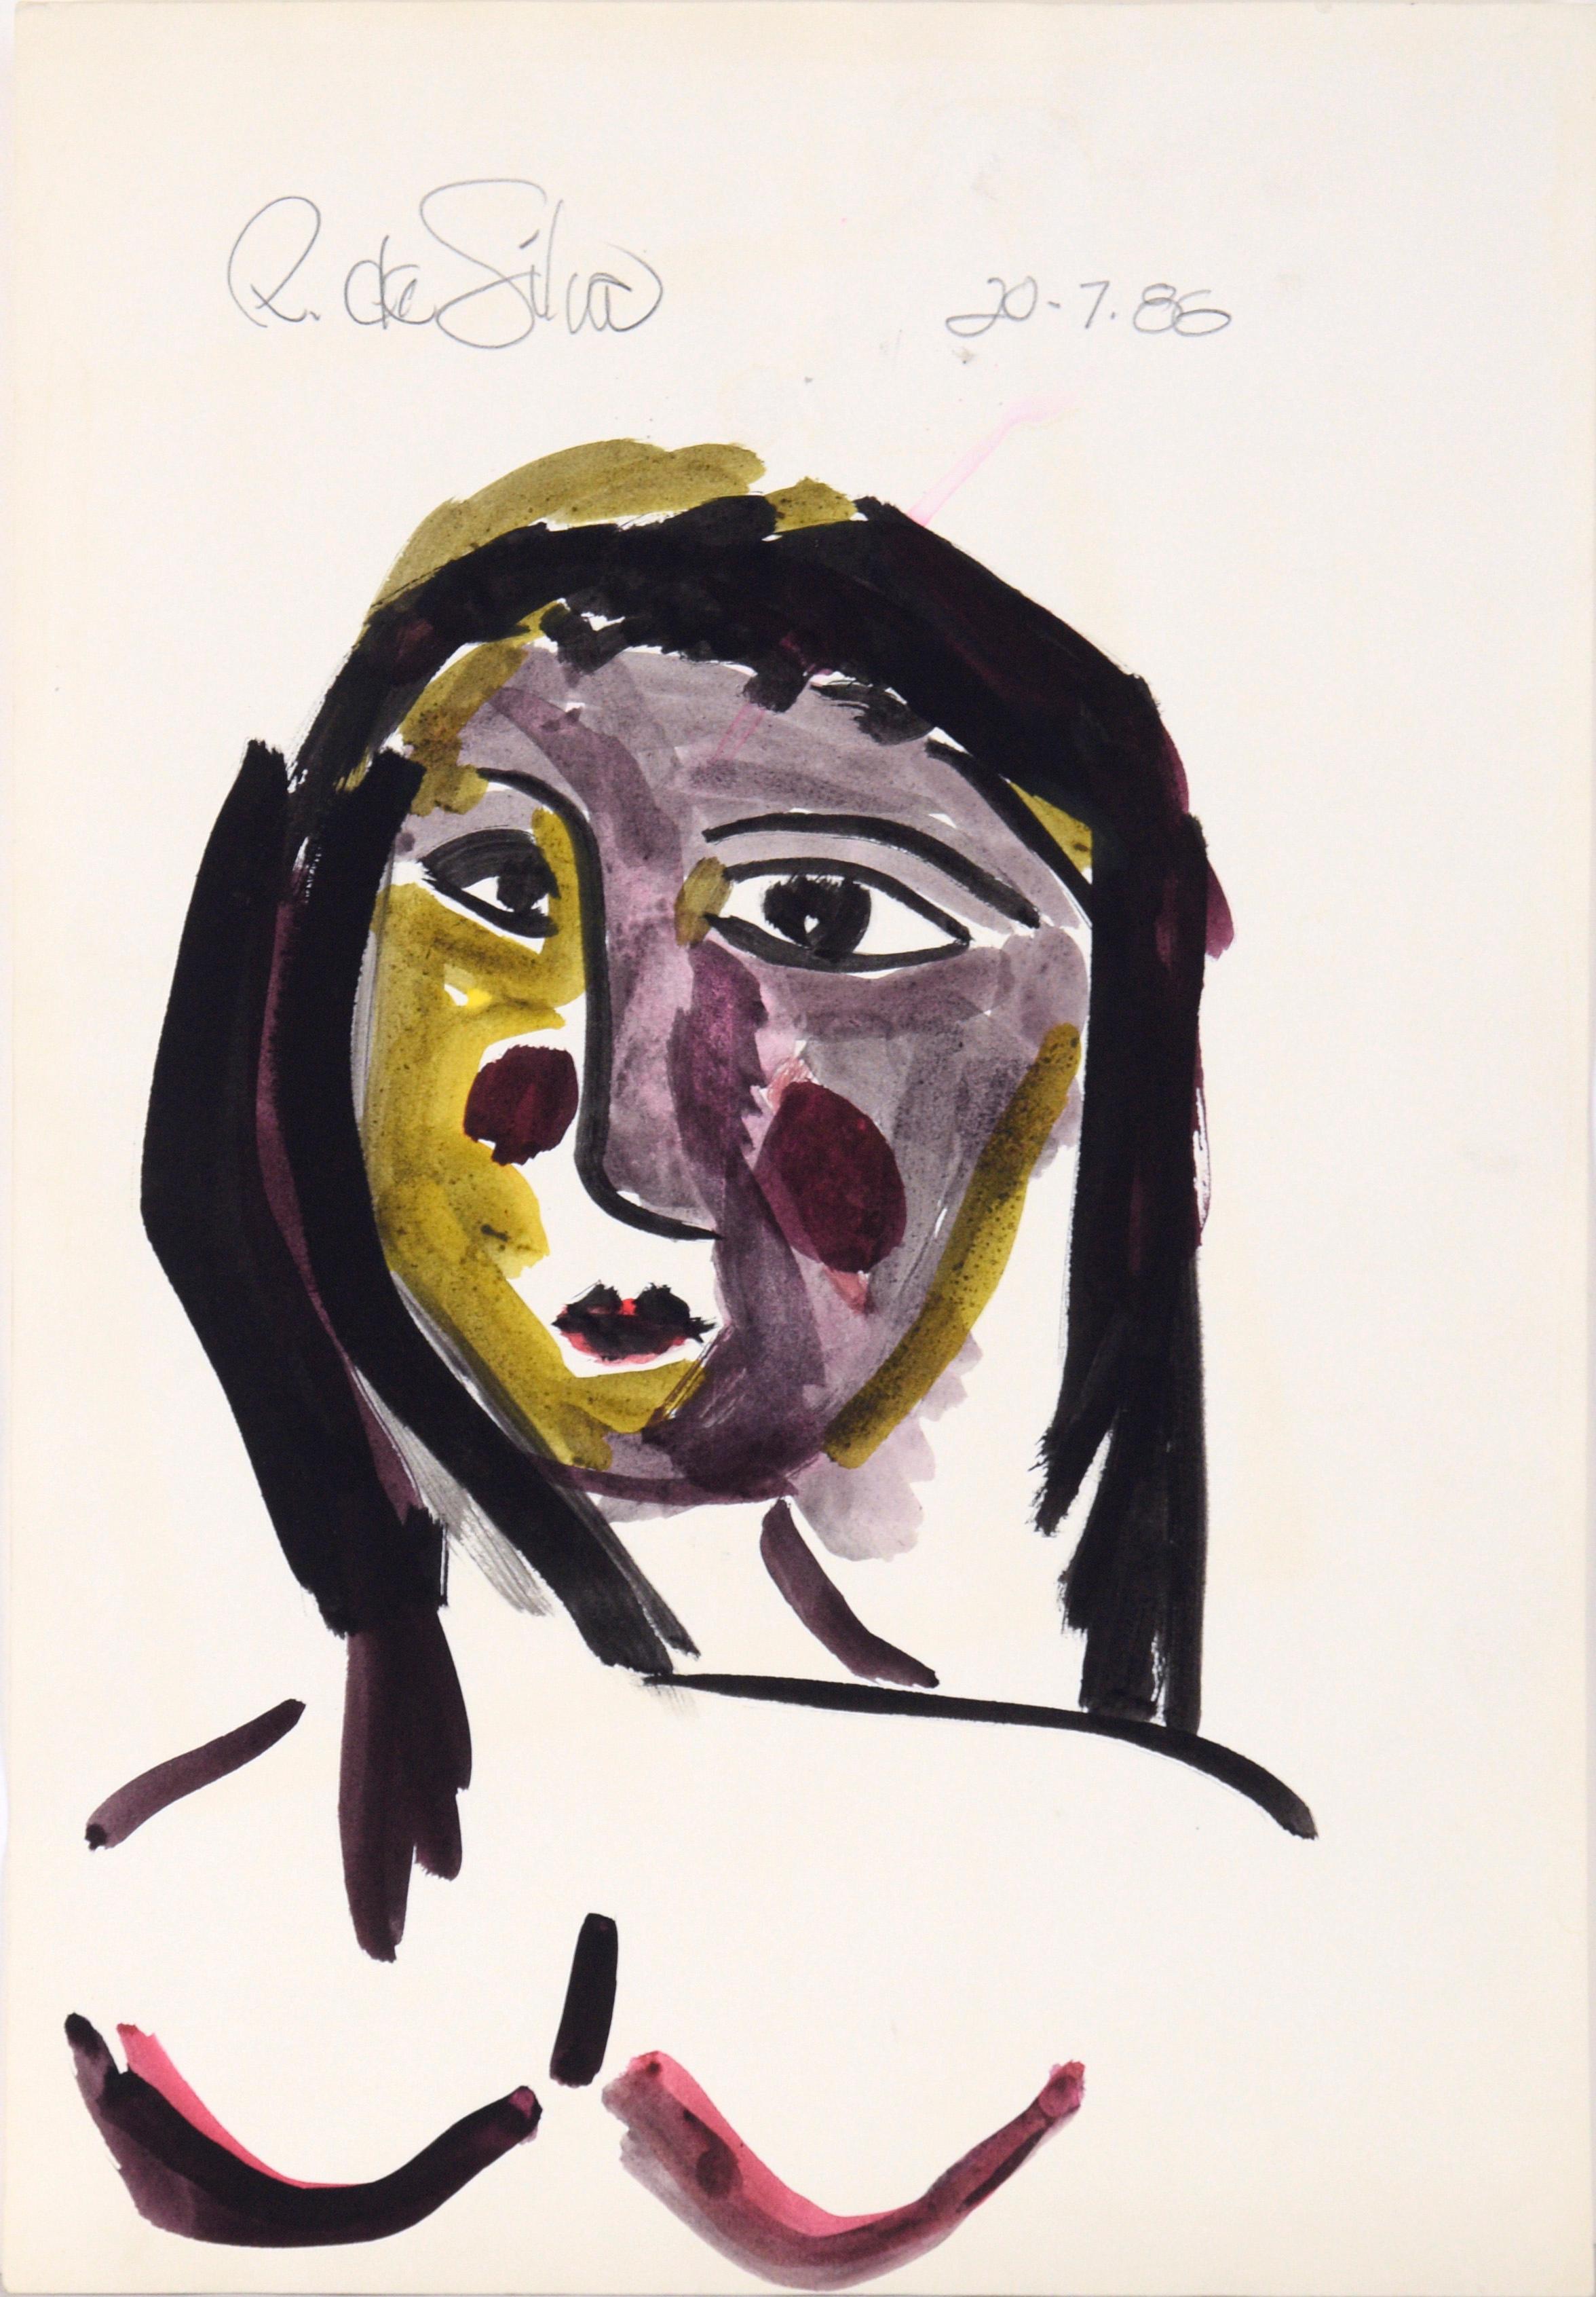 Ricardo de Silva Abstract Painting - Portrait of a Woman with Rosy Cheeks after Picasso in Acrylic on Paper